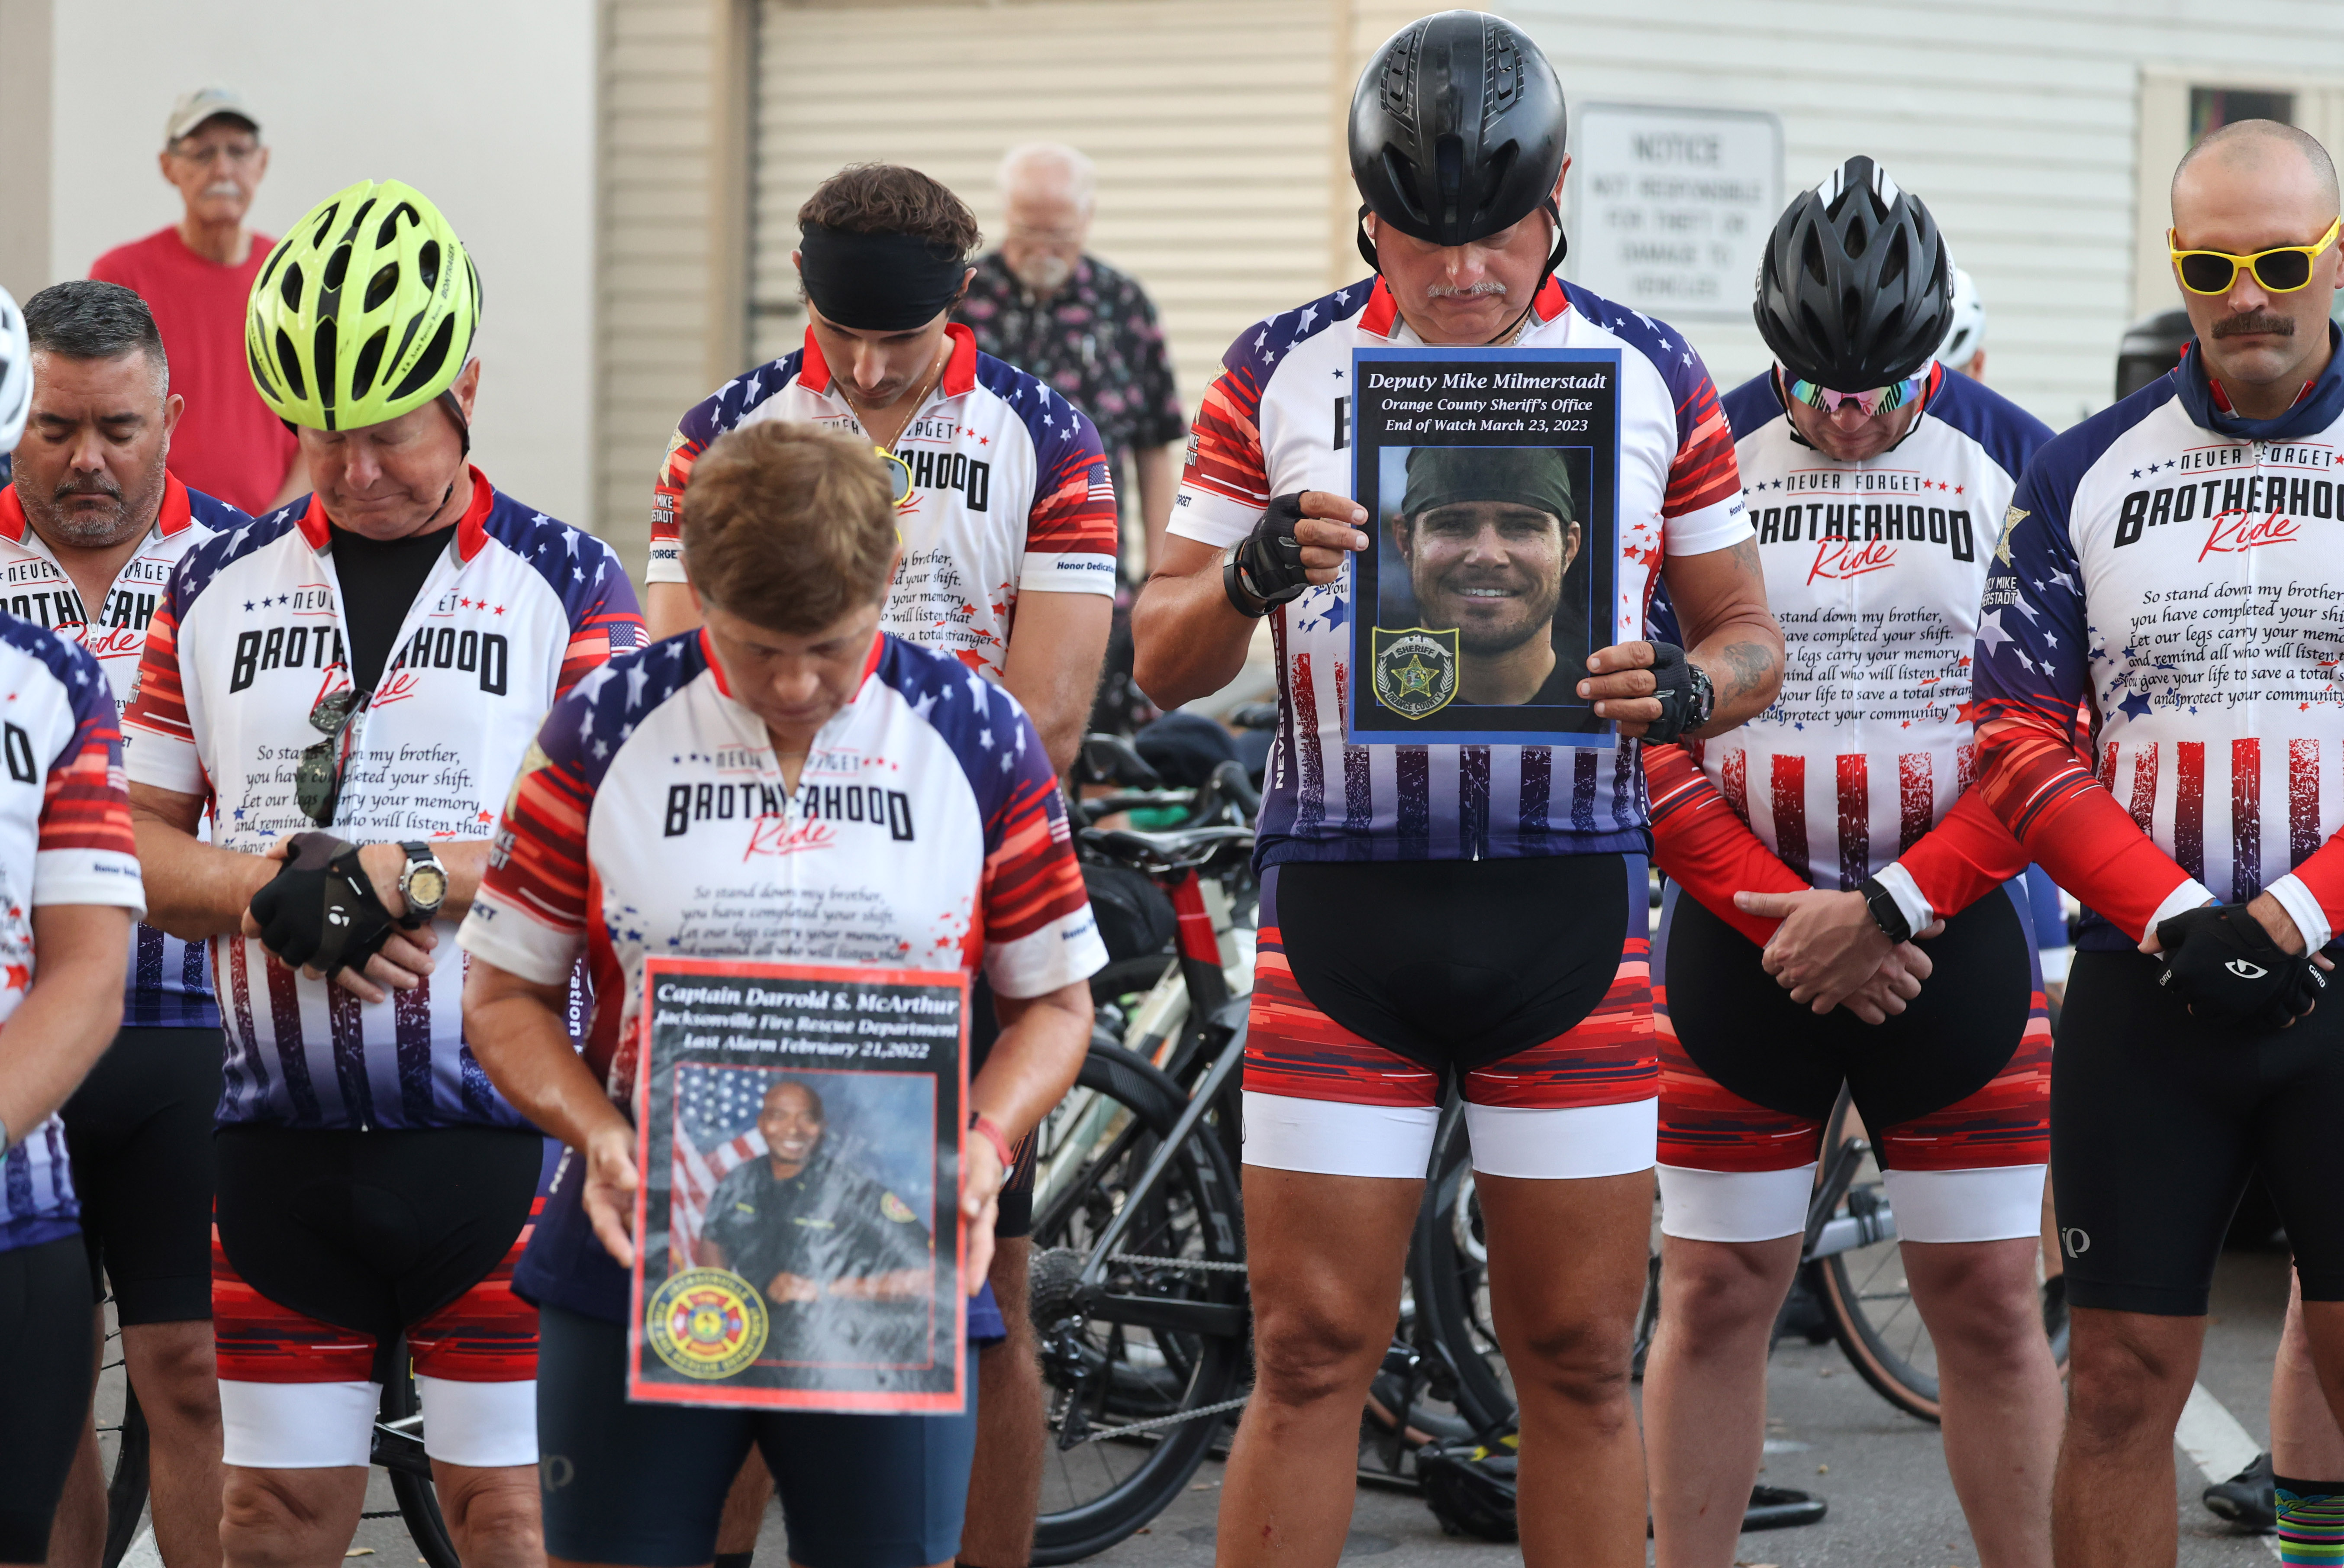 Cyclist participating in the Brotherhood Ride bow their heads during a prayer before departing the Elks Lodge 1079, on their way to Cocoa Beach, on Tuesday, October 31, 2023. The ride is dedicated to the 28 Florida Fallen First Responders who died in the line of duty in 2022 while protecting their communities. They started in Naples and will end their 9-day ride through Florida in Miami.(Ricardo Ramirez Buxeda/ Orlando Sentinel)